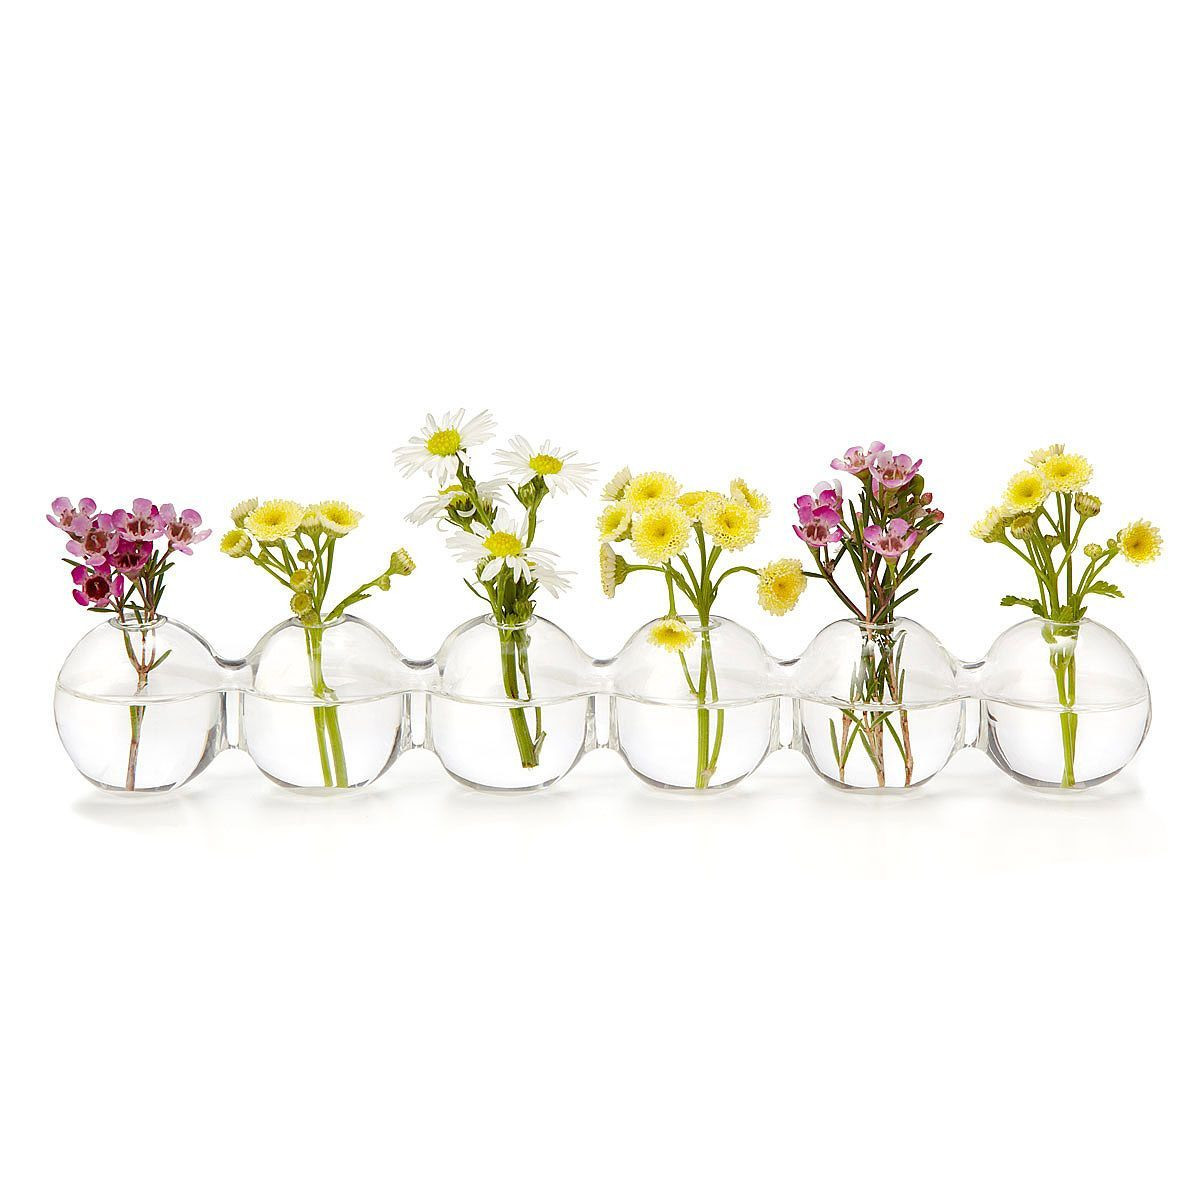 11 Amazing Low Rectangular Vase 2024 free download low rectangular vase of caterpillar bud vase bulbs display and glass intended for this bud vase with a row of attached glass bulbs allows you to create elegant floral displays